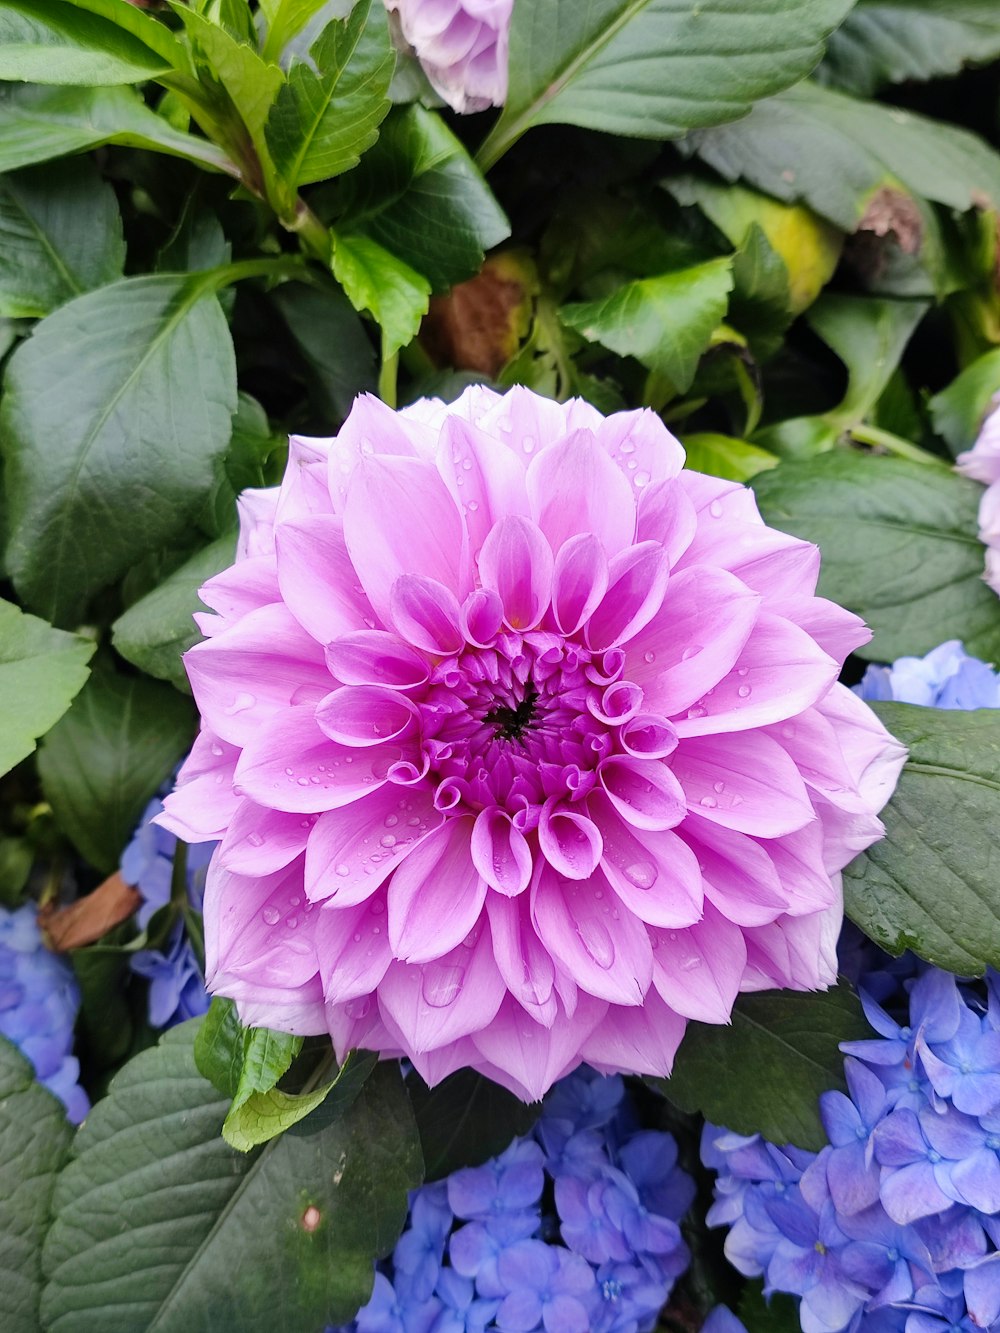 a purple flower surrounded by blue and purple flowers